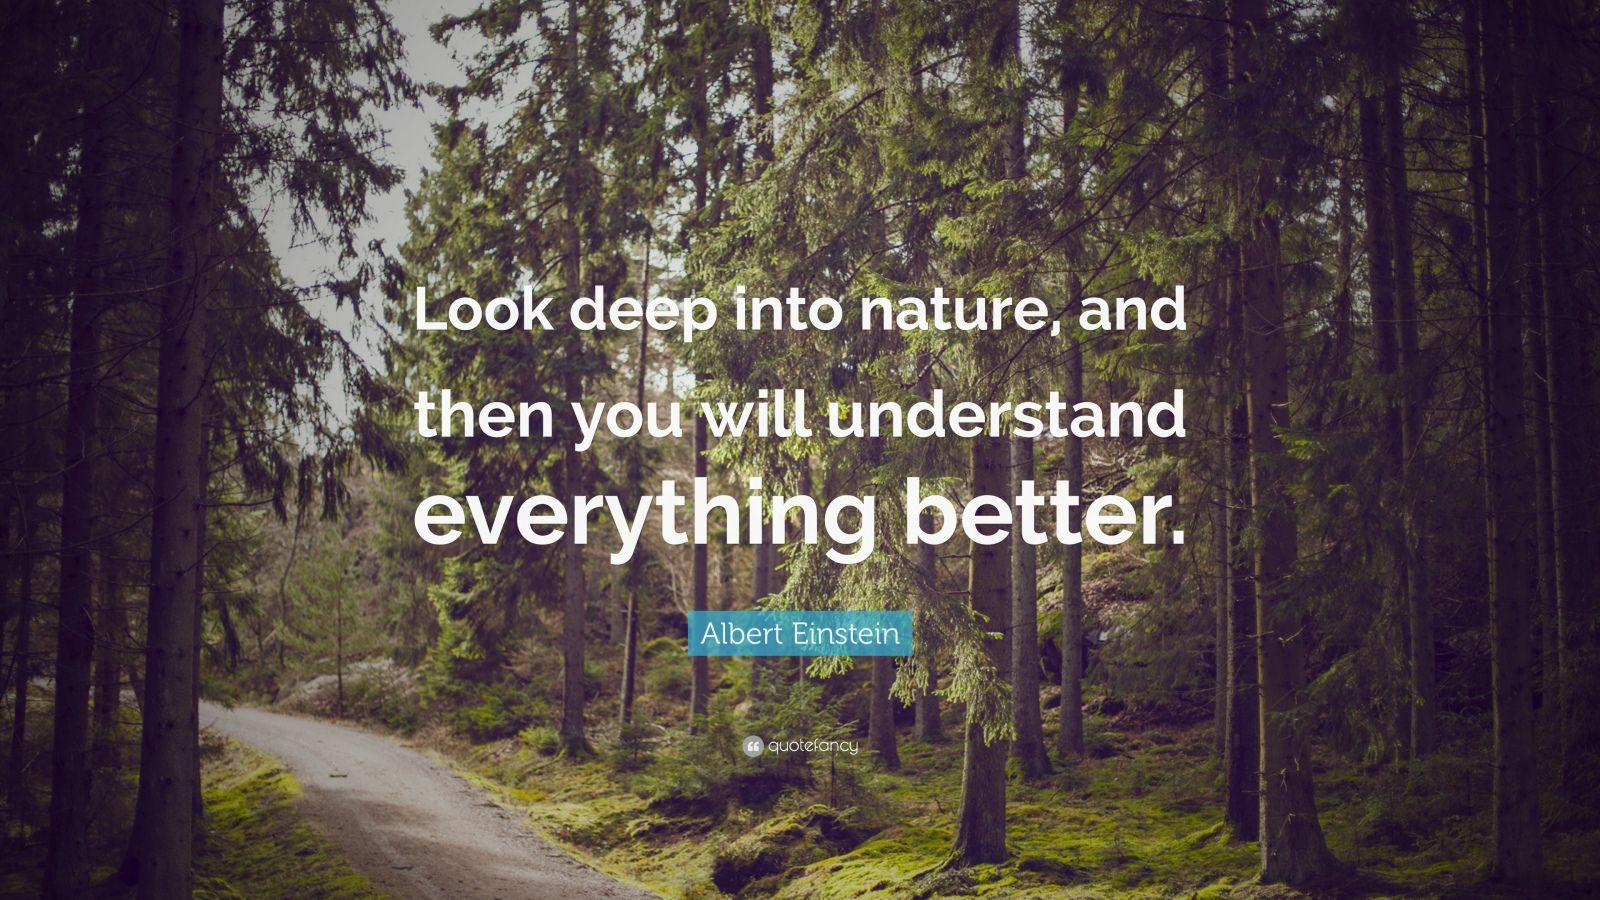 Albert Einstein Quote: “Look deep into nature, and then you will ...